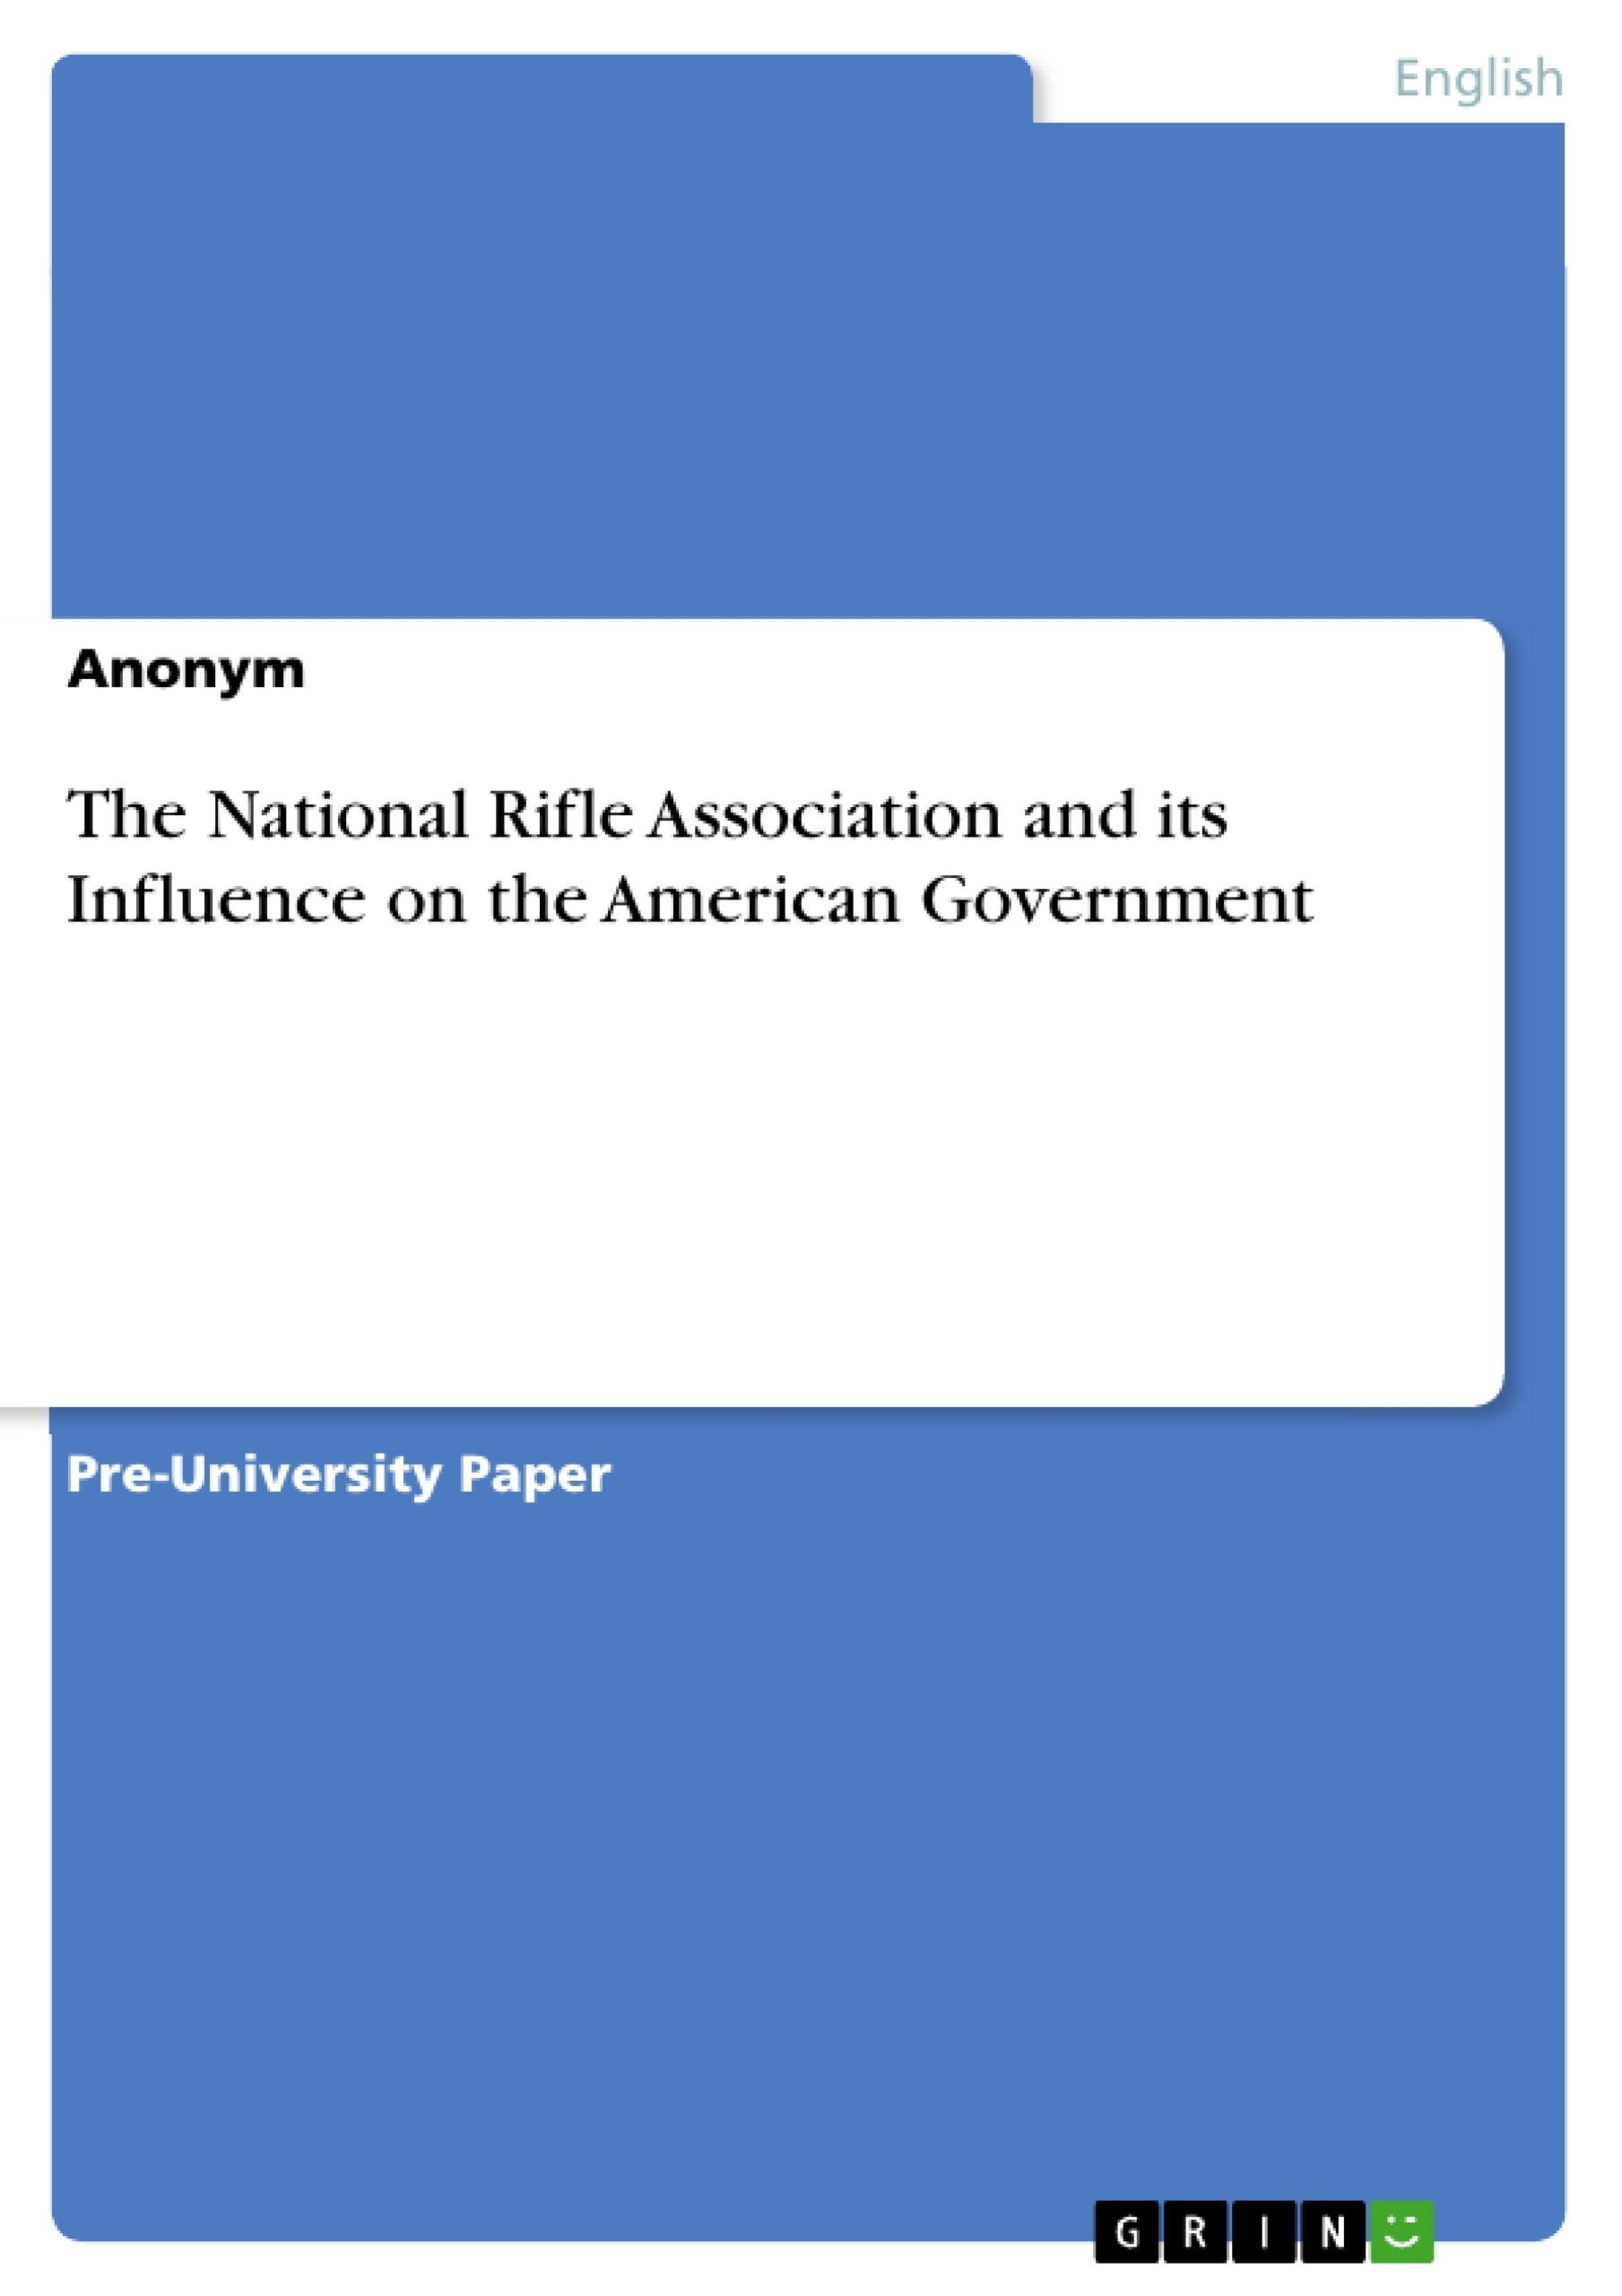 Title: The National Rifle Association and its Influence on the American Government